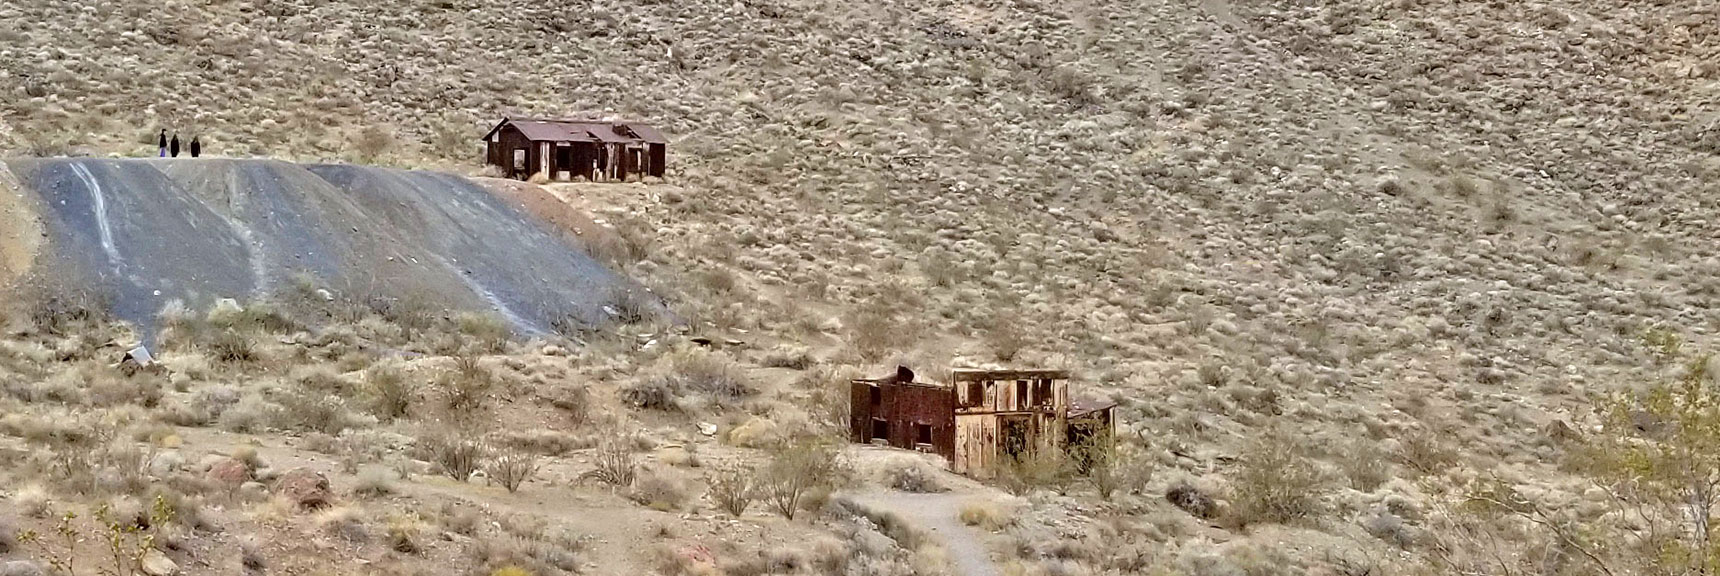 Some Remaining Leadfield Buildings. | Titus Canyon Grand Loop by Mountain Bike | Death Valley National Park, California